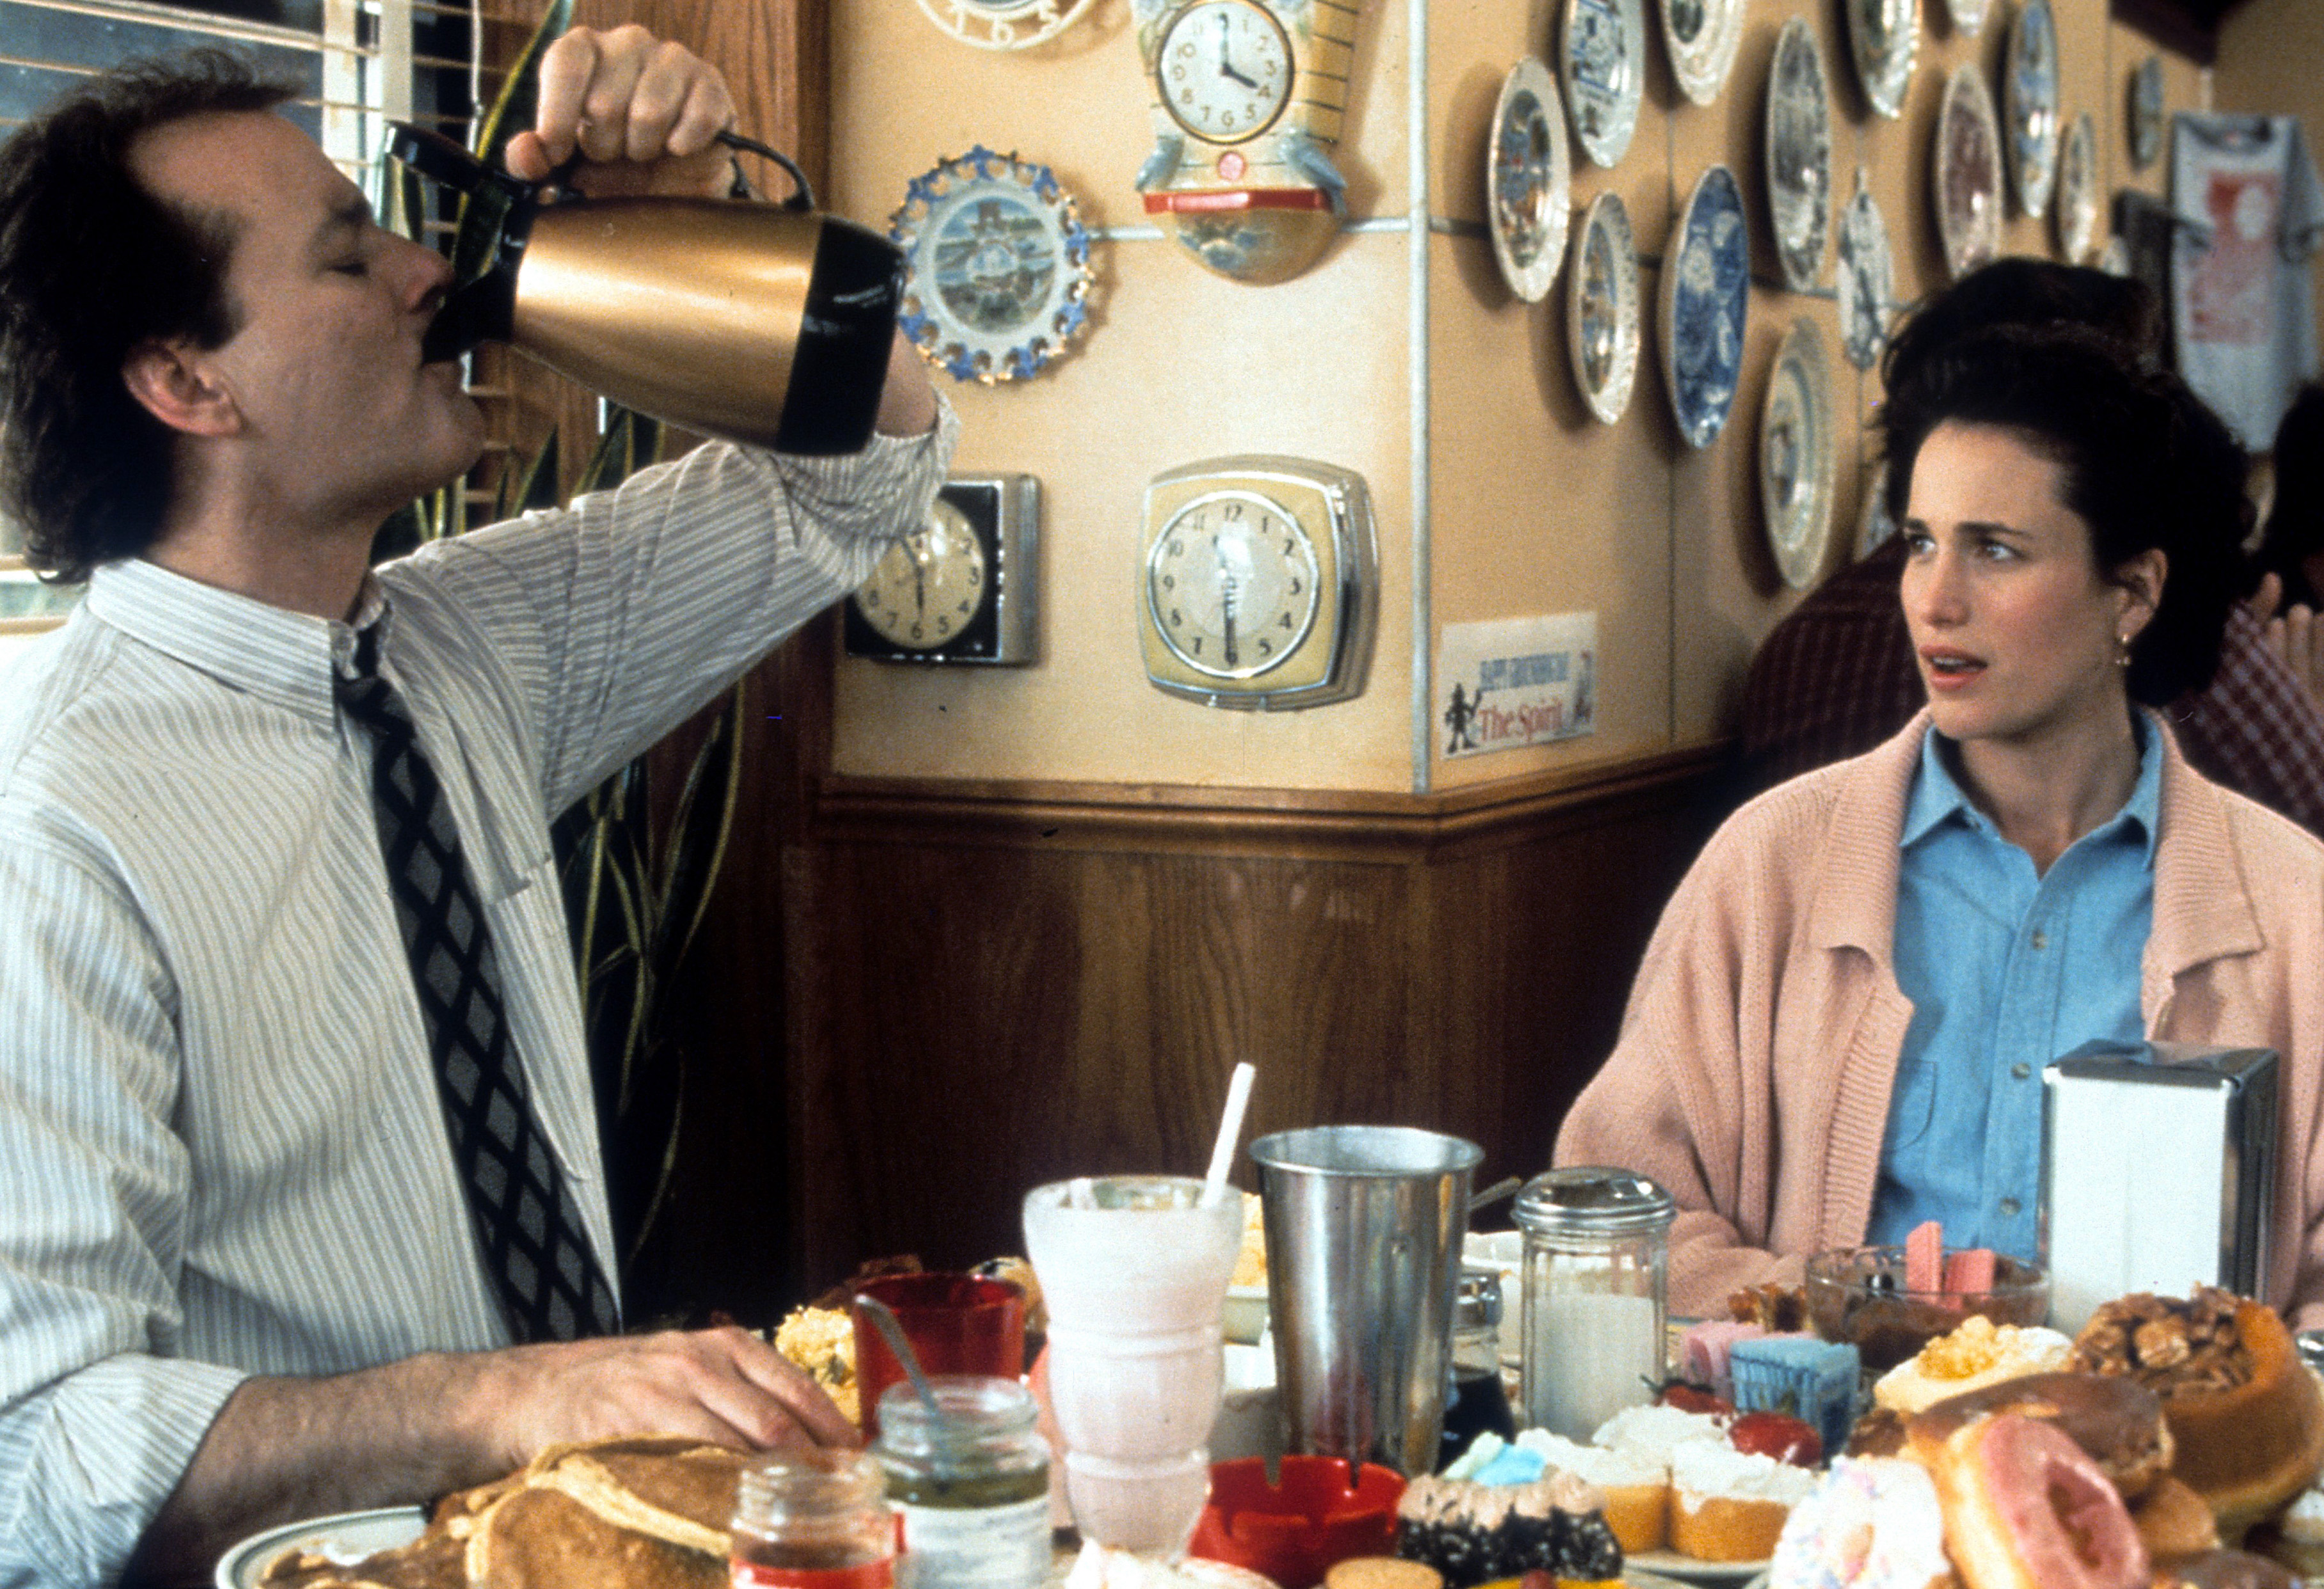 Bill Murray and Andie MacDowell in a scene from the film 'Groundhog Day'